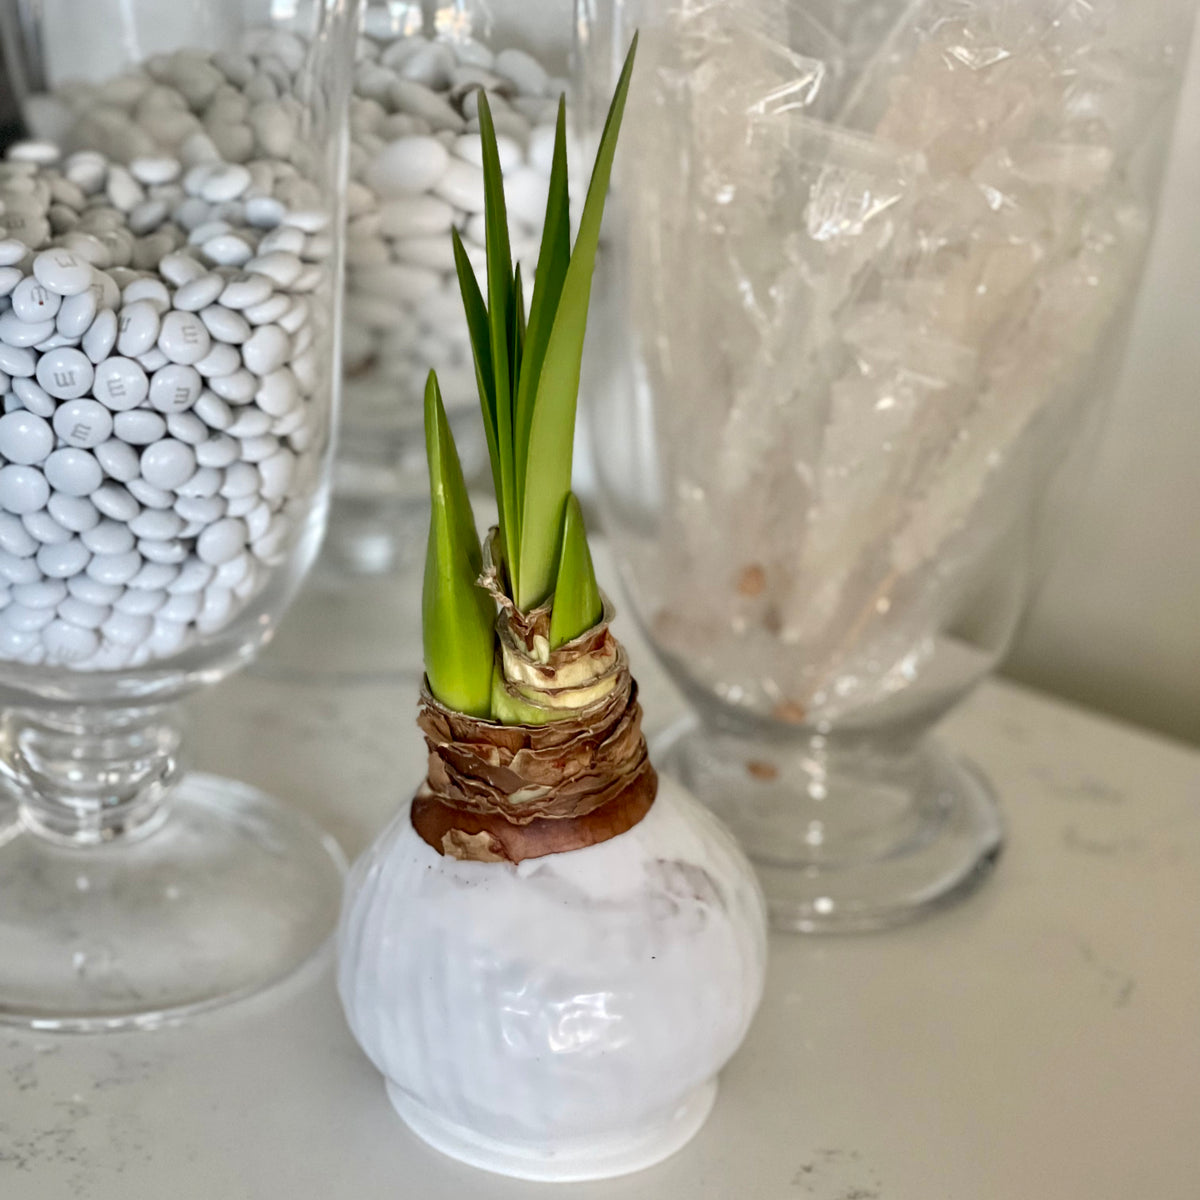 White Waxed Amaryllis Bulb with sovereign blooms